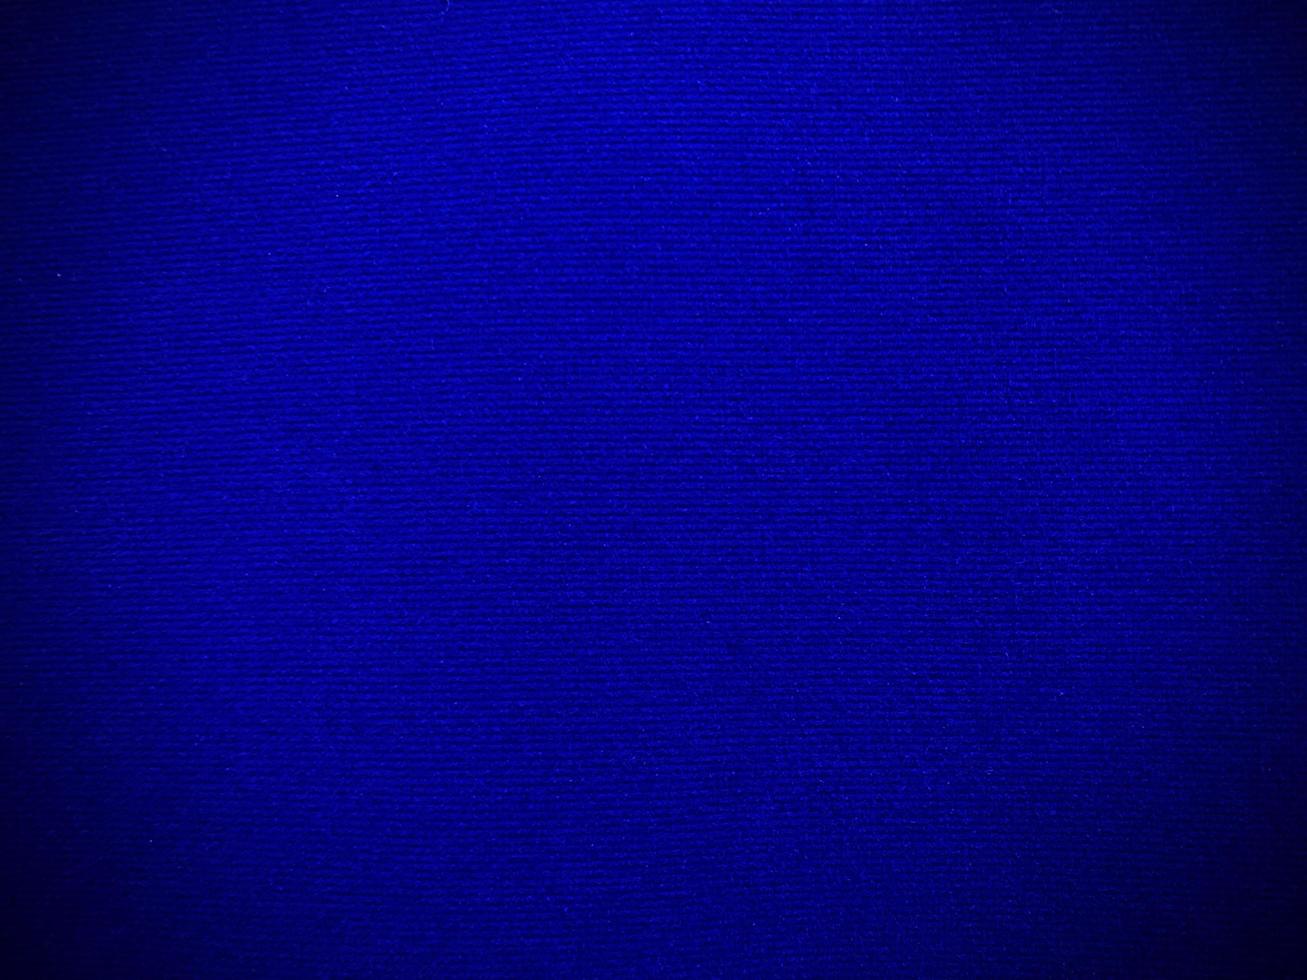 Dark blue velvet fabric texture used as background. Empty dark blue fabric background of soft and smooth textile material. There is space for text. photo